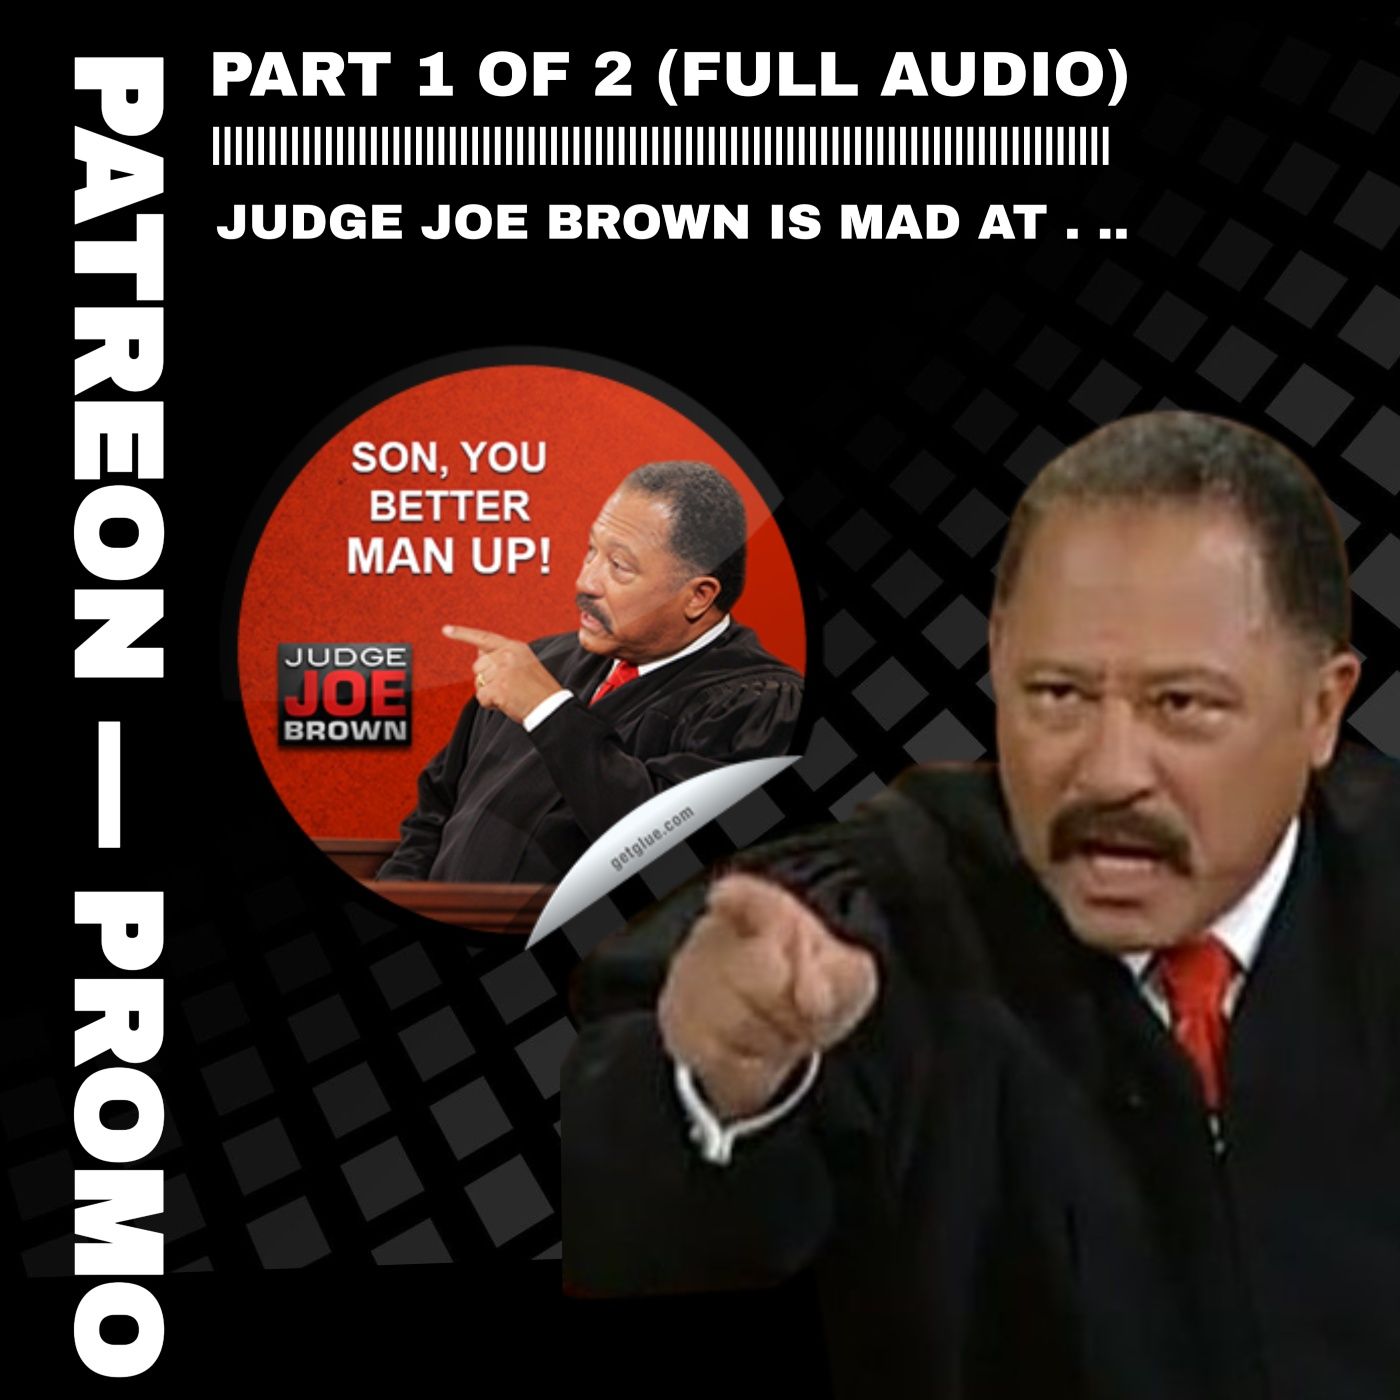 JUDGE JOE BROWN MAD AT YOU (MATURE AUDIENCES ONLY) - MAXINE WATERS EXPOSED